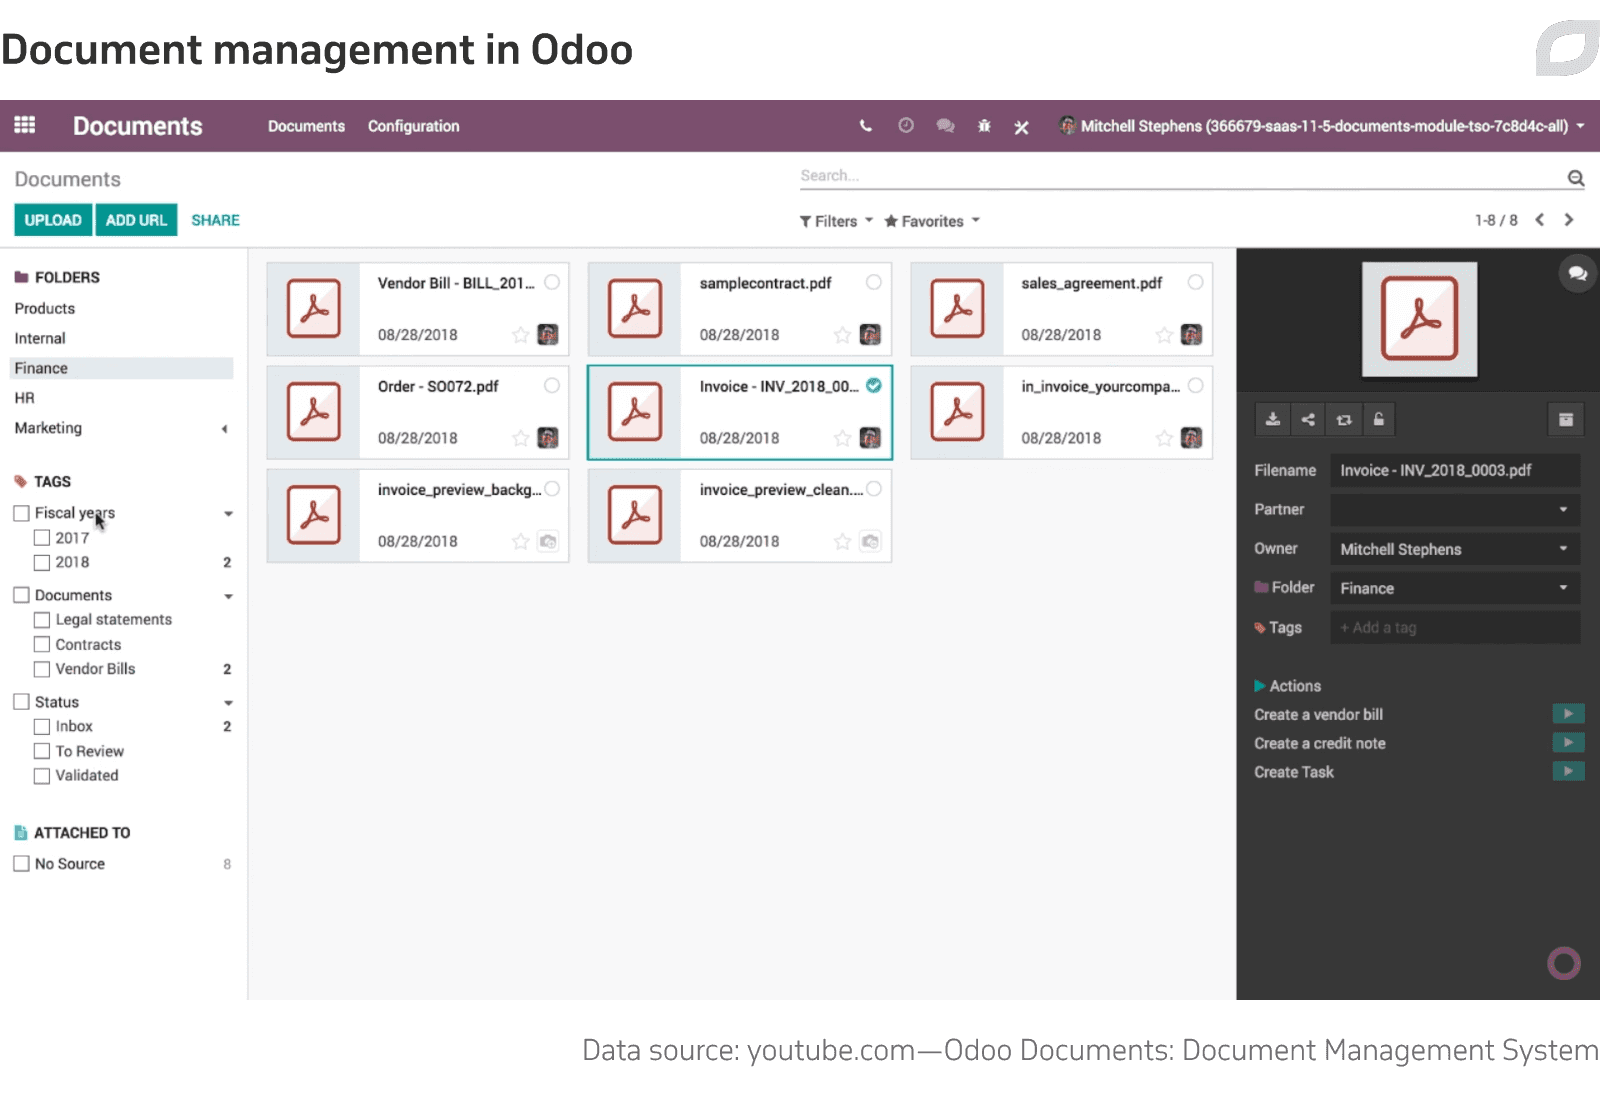 Document management in Odoo